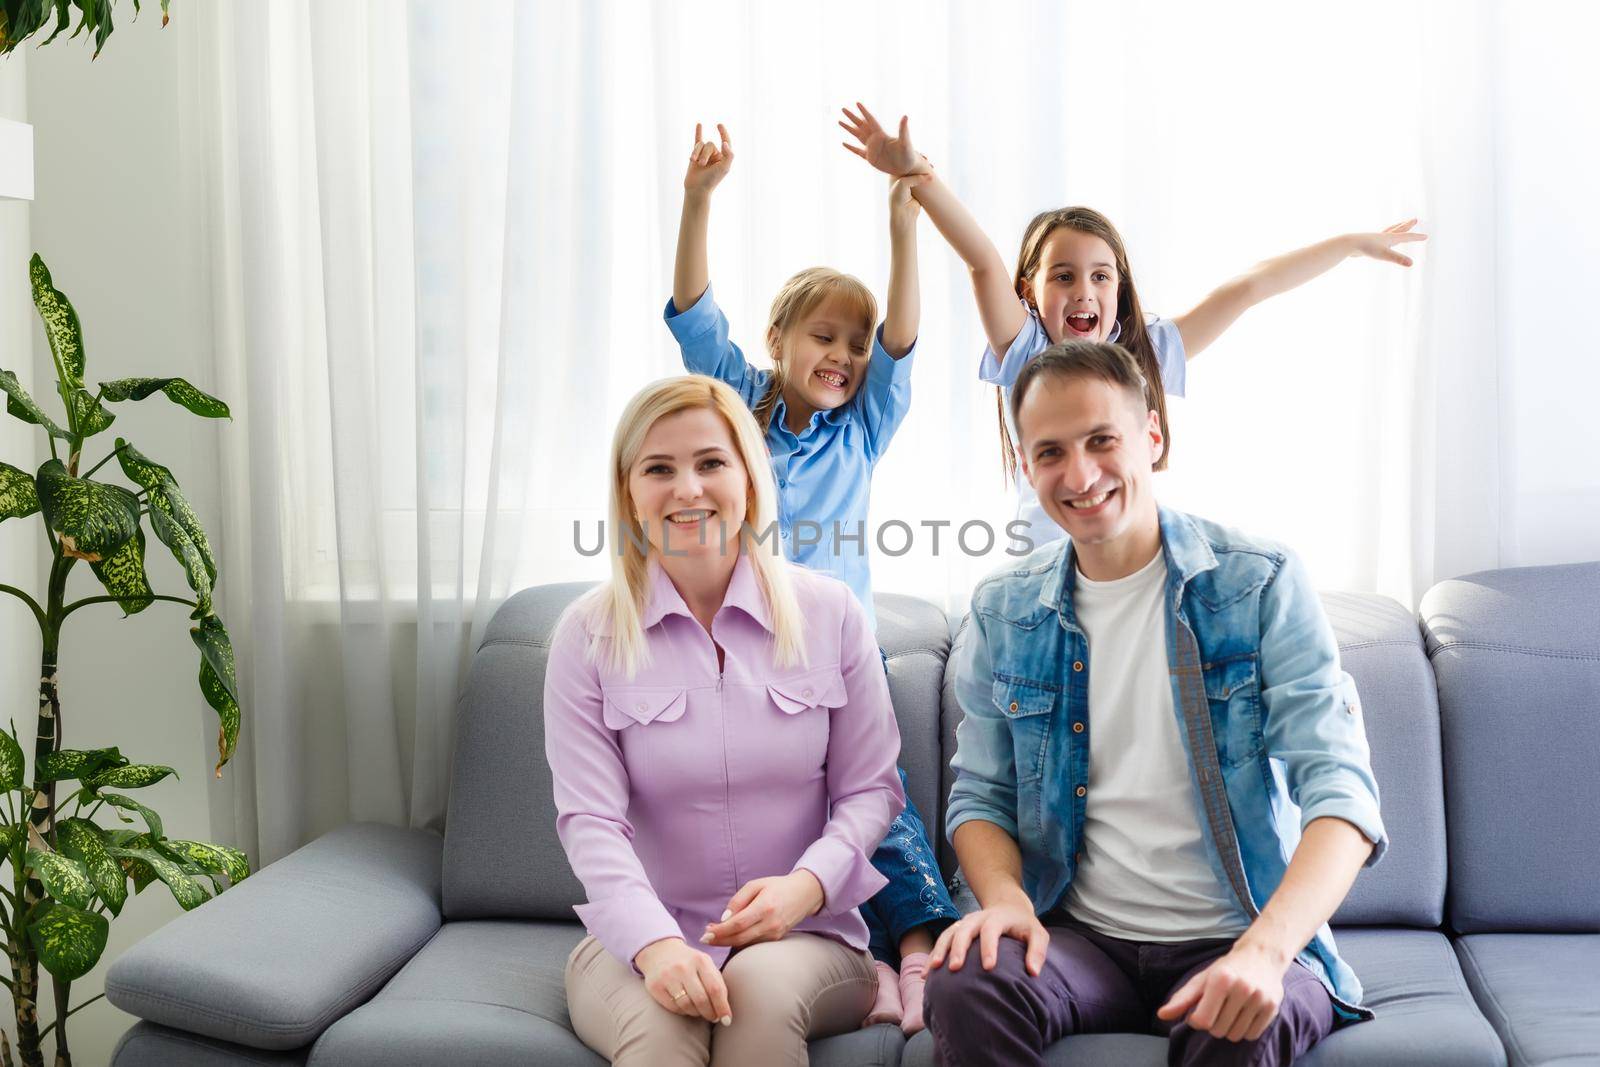 Cheerful young family with kids laughing sitting on couch together, parents with children enjoying entertaining at home by Andelov13